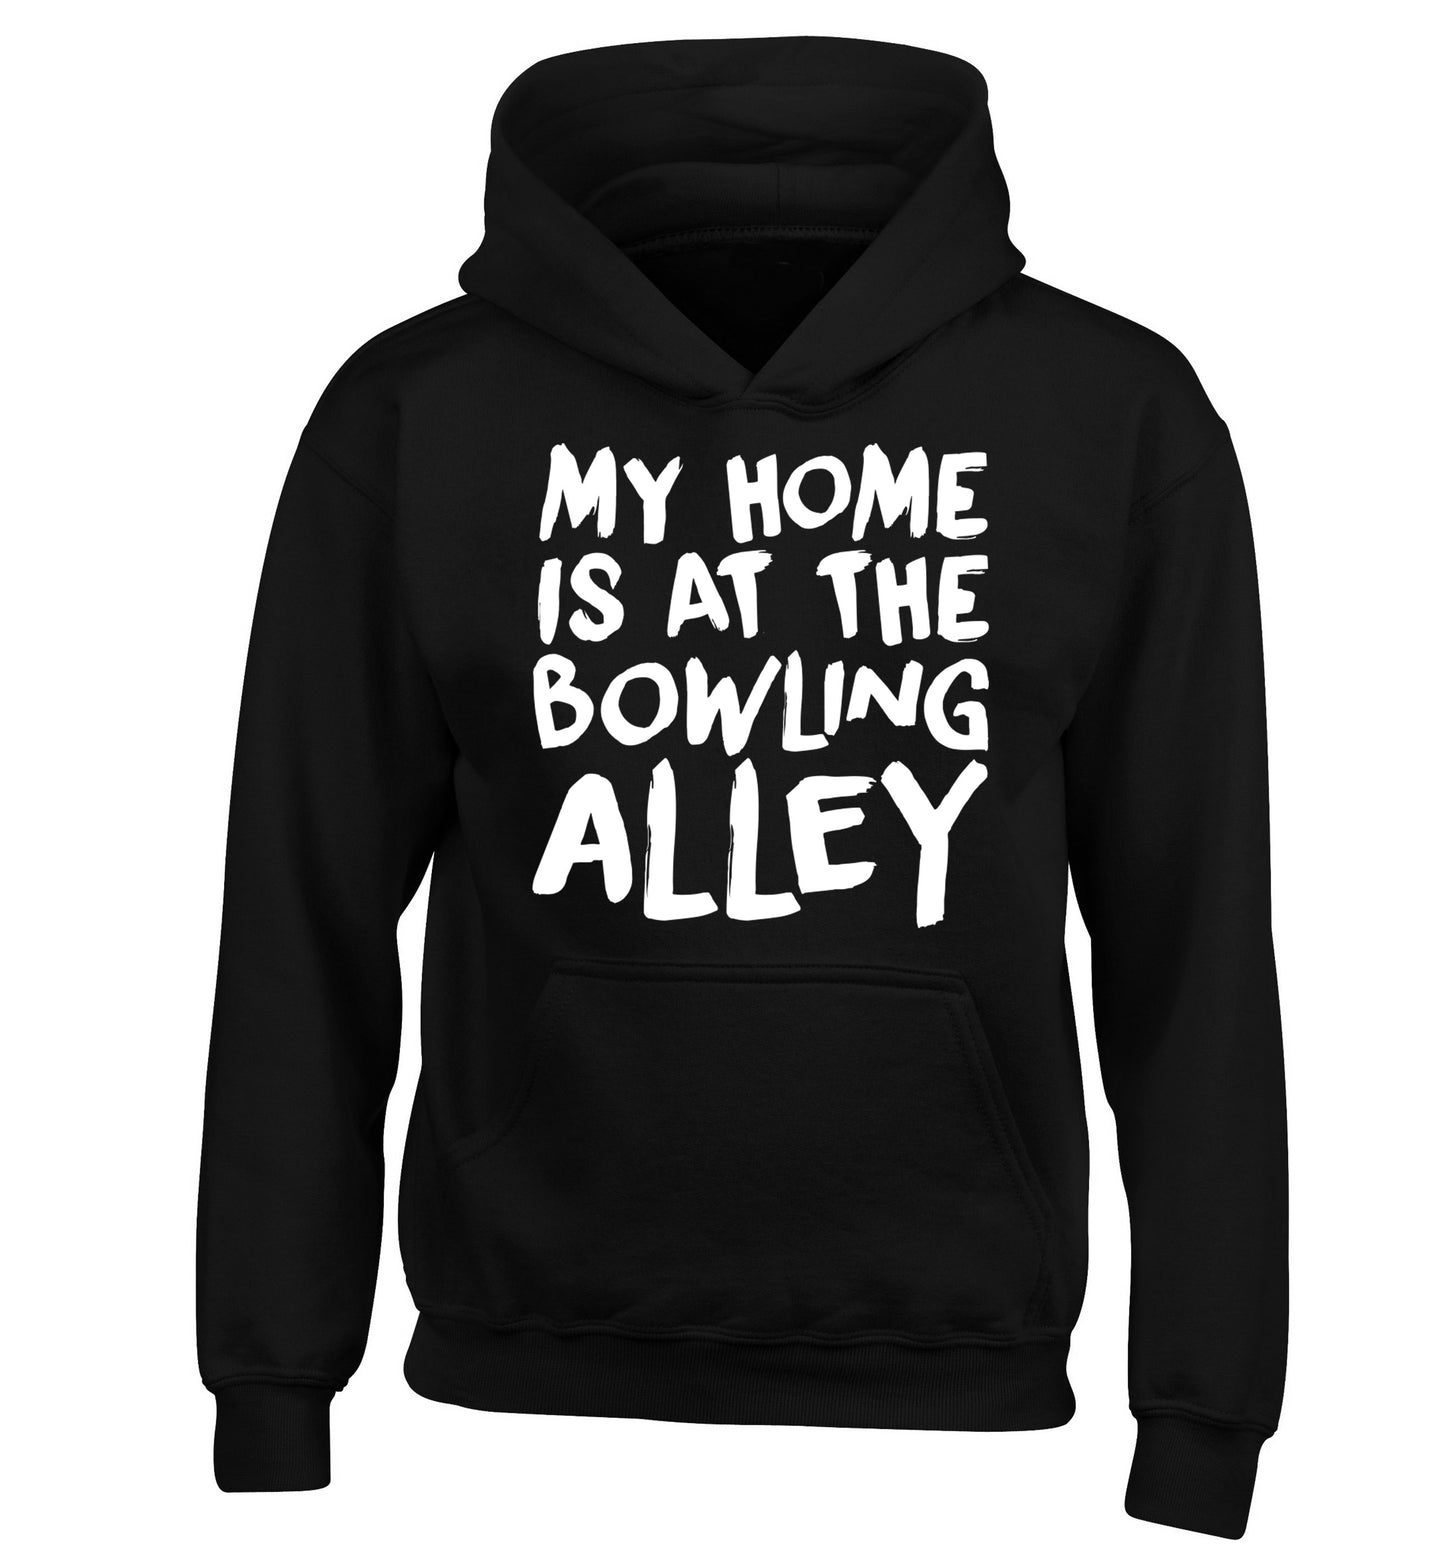 My home is at the bowling alley children's black hoodie 12-14 Years